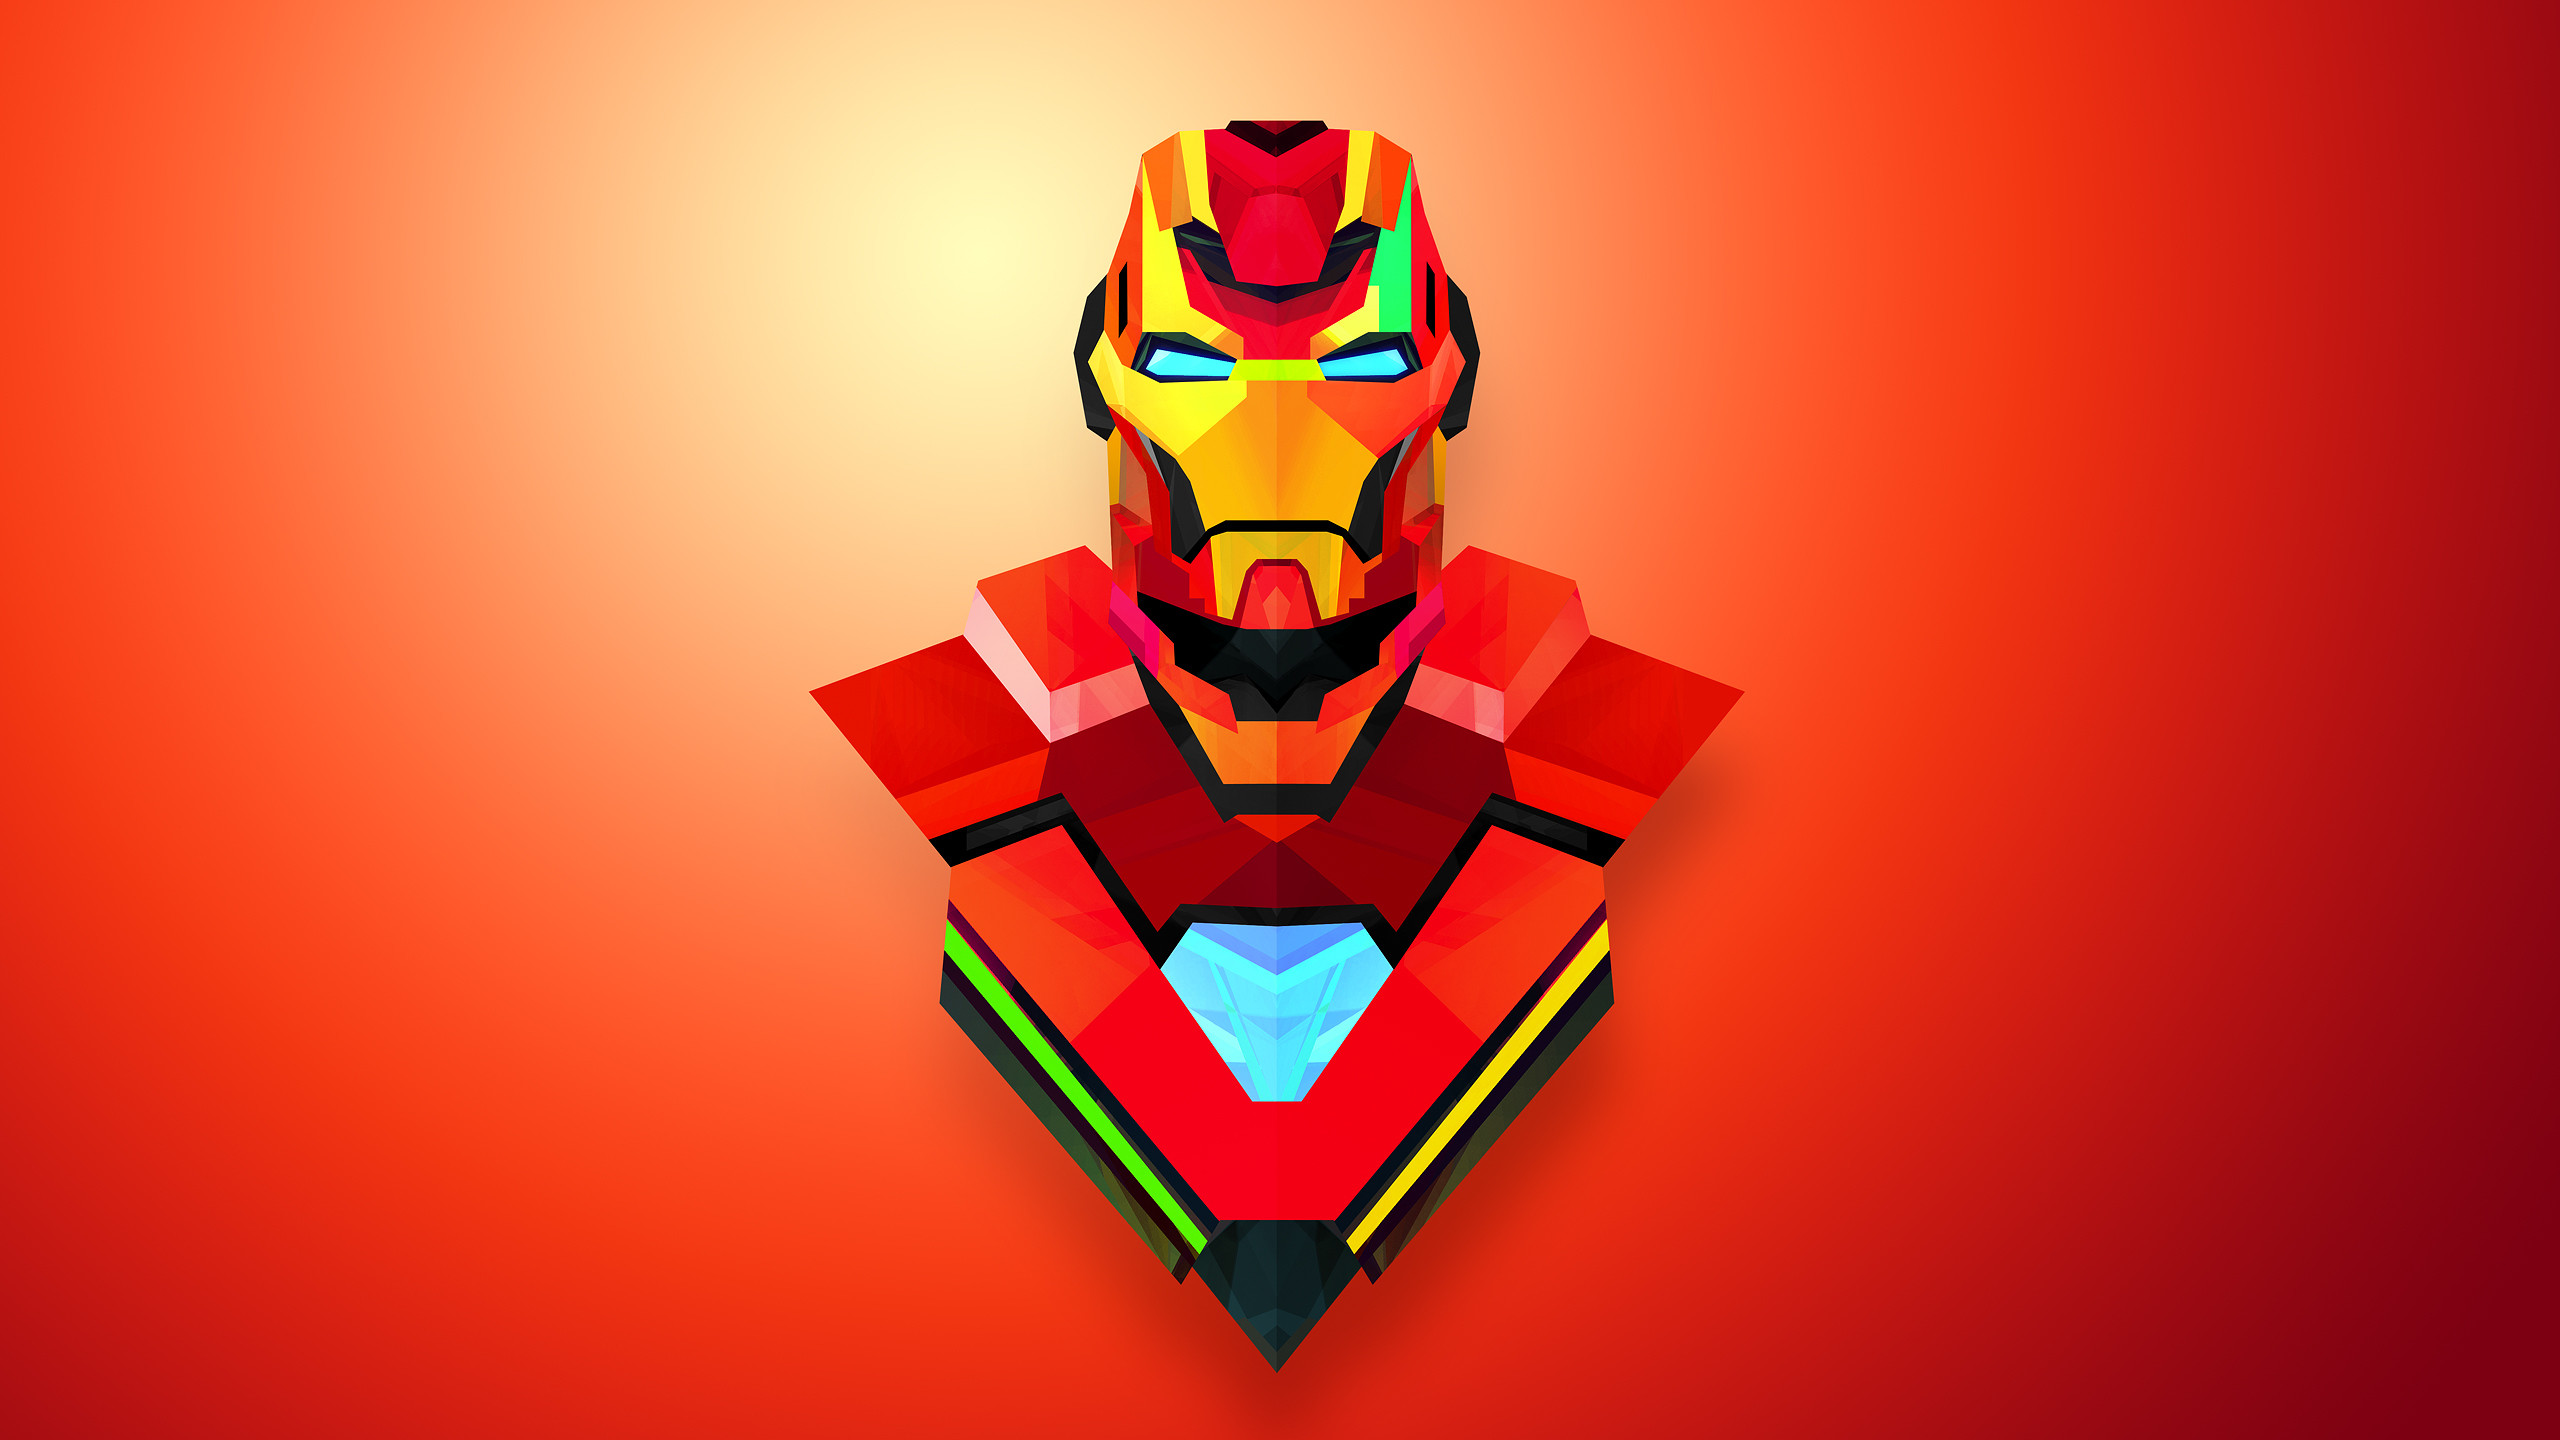 2560x1440 iron man cartoon images windows wallpapers hd free cool background images  mac windows 10 tablet 